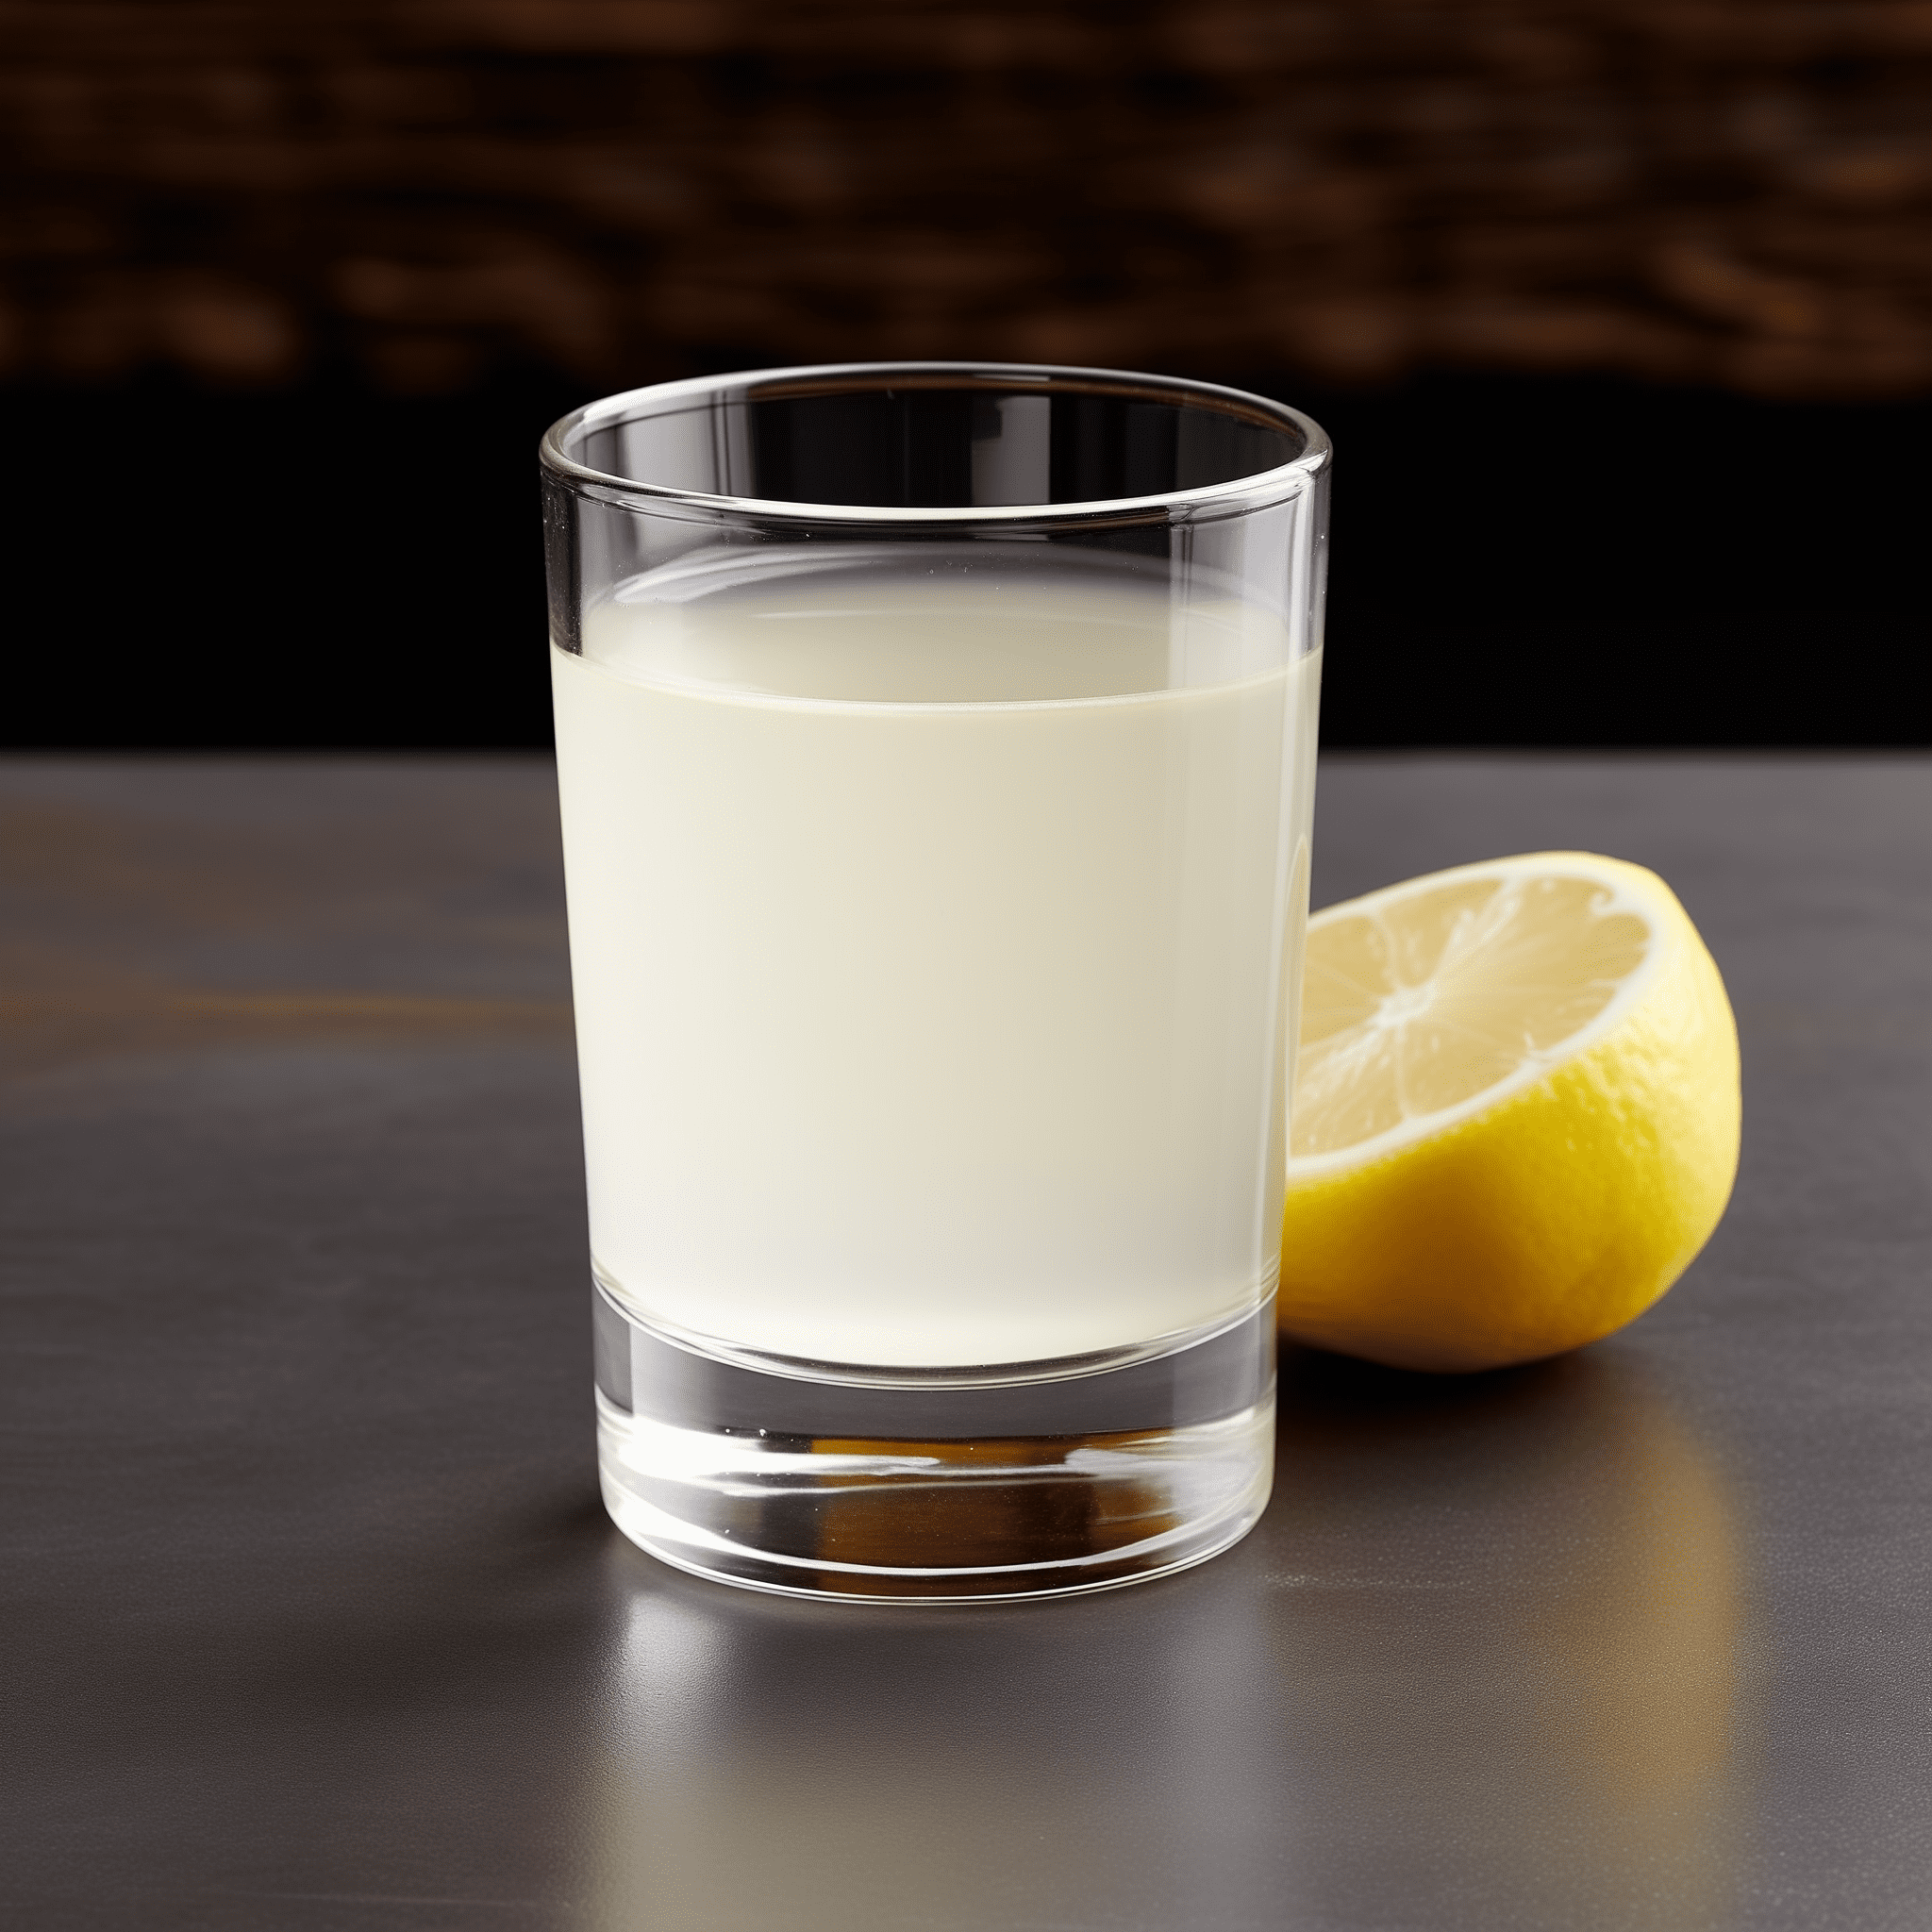 Lemon Drop Cocktail Recipe - The Lemon Drop cocktail is a delightful combination of sweet and sour flavors. The sweetness of the simple syrup balances the tartness of the lemon juice, while the vodka adds a smooth, strong kick. The sugar rim adds an extra touch of sweetness, making this cocktail a refreshing and enjoyable experience.